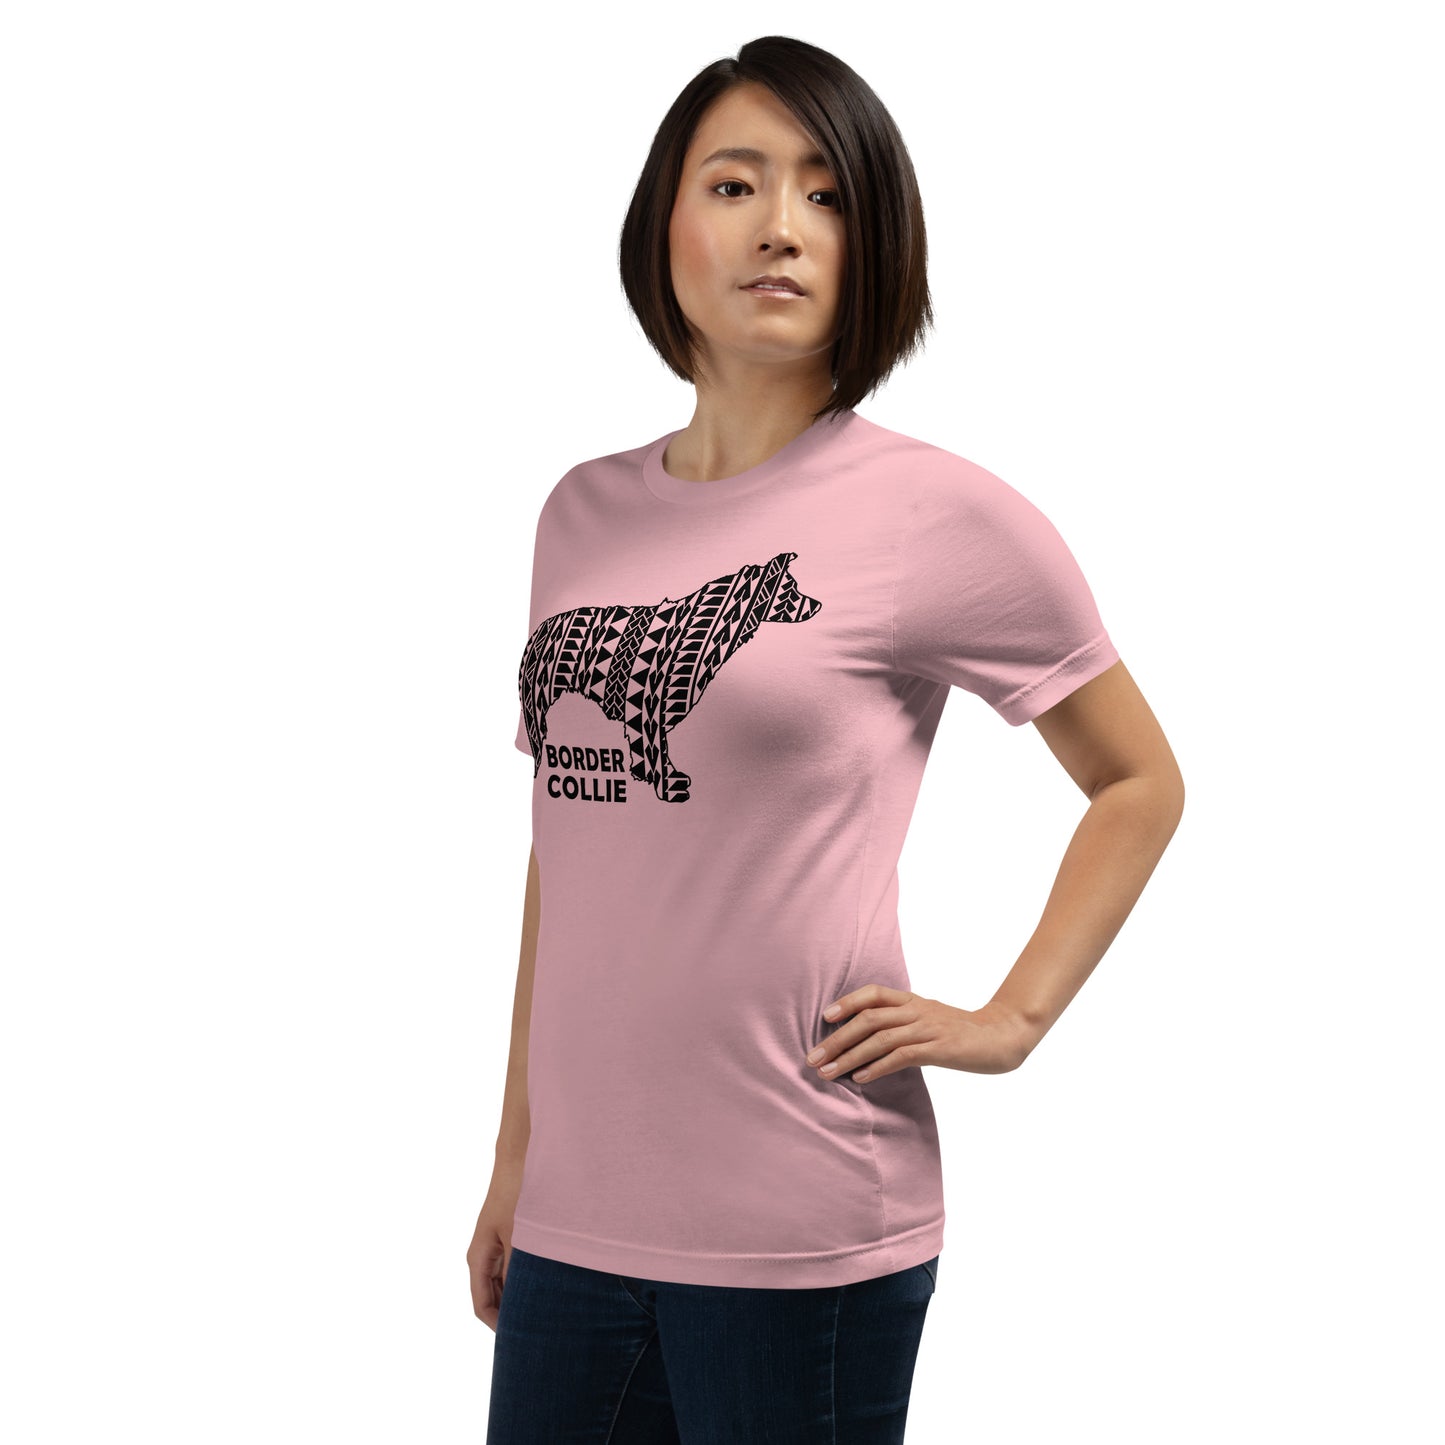 Border Collie Polynesian t-shirt pink by Dog Artistry.